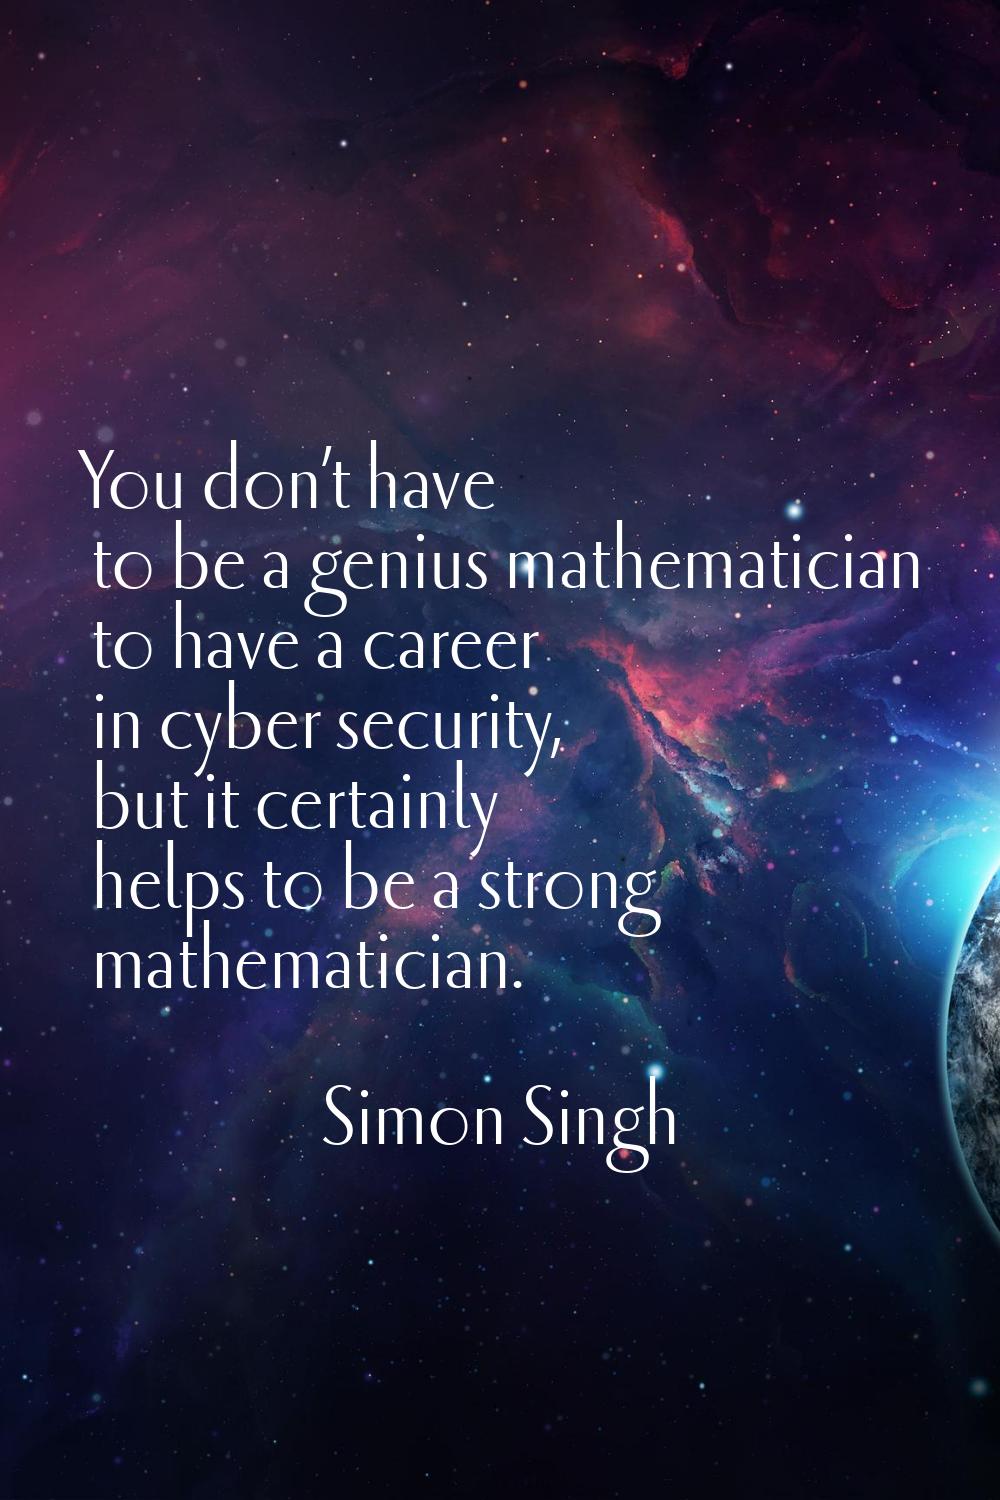 You don’t have to be a genius mathematician to have a career in cyber security, but it certainly he